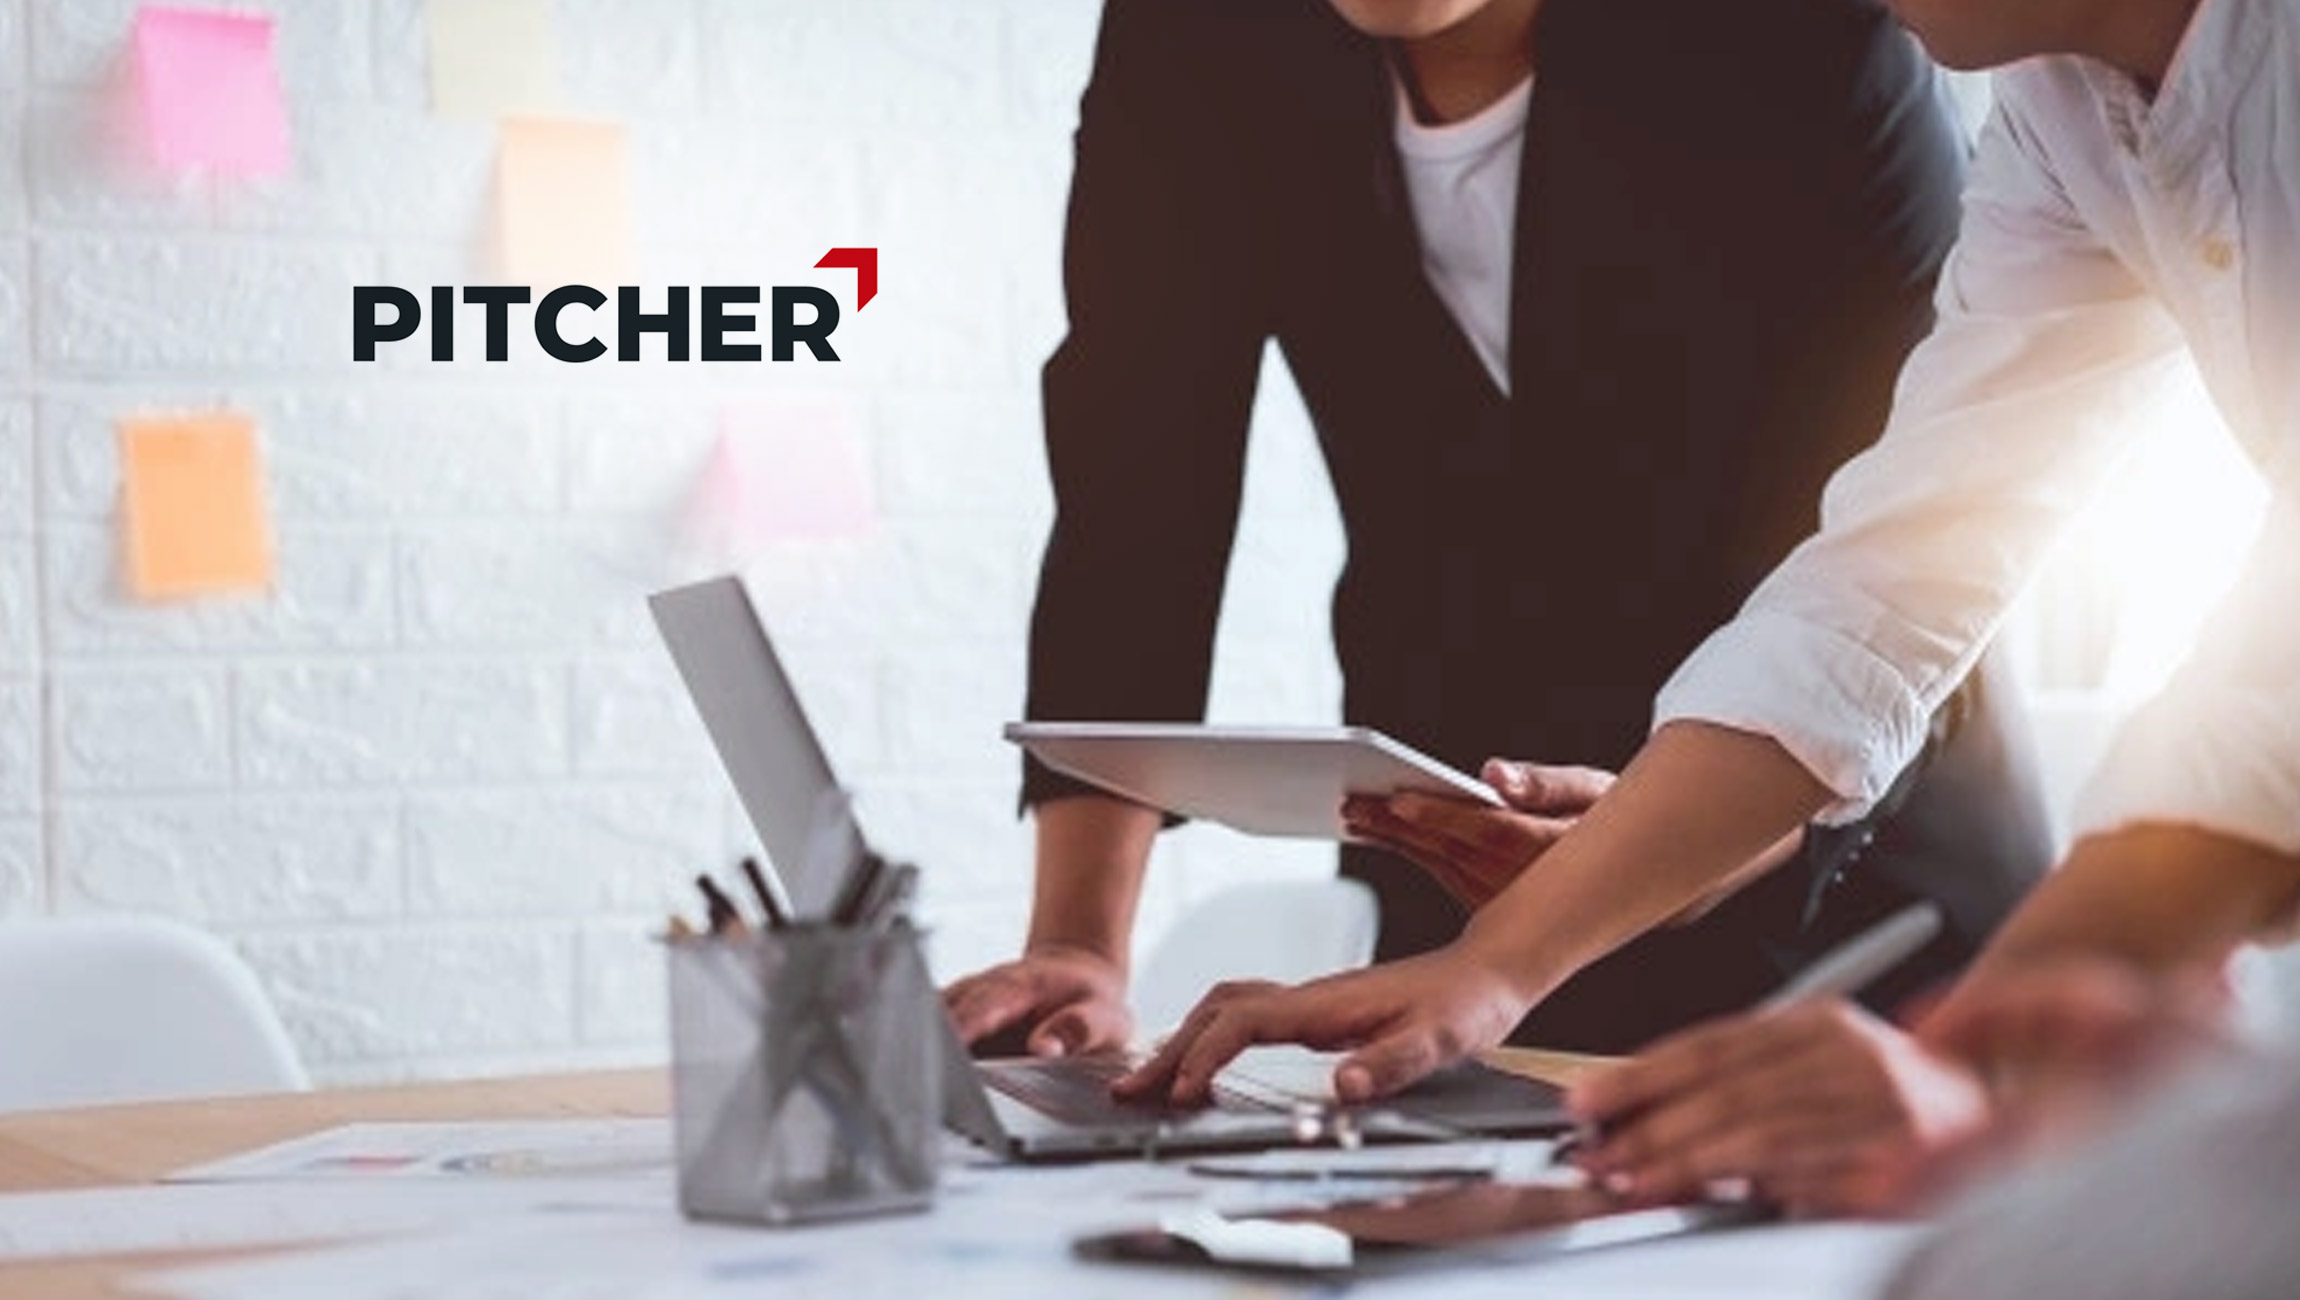 Pitcher Announces Strategic Growth Investment From Crest Rock Partners